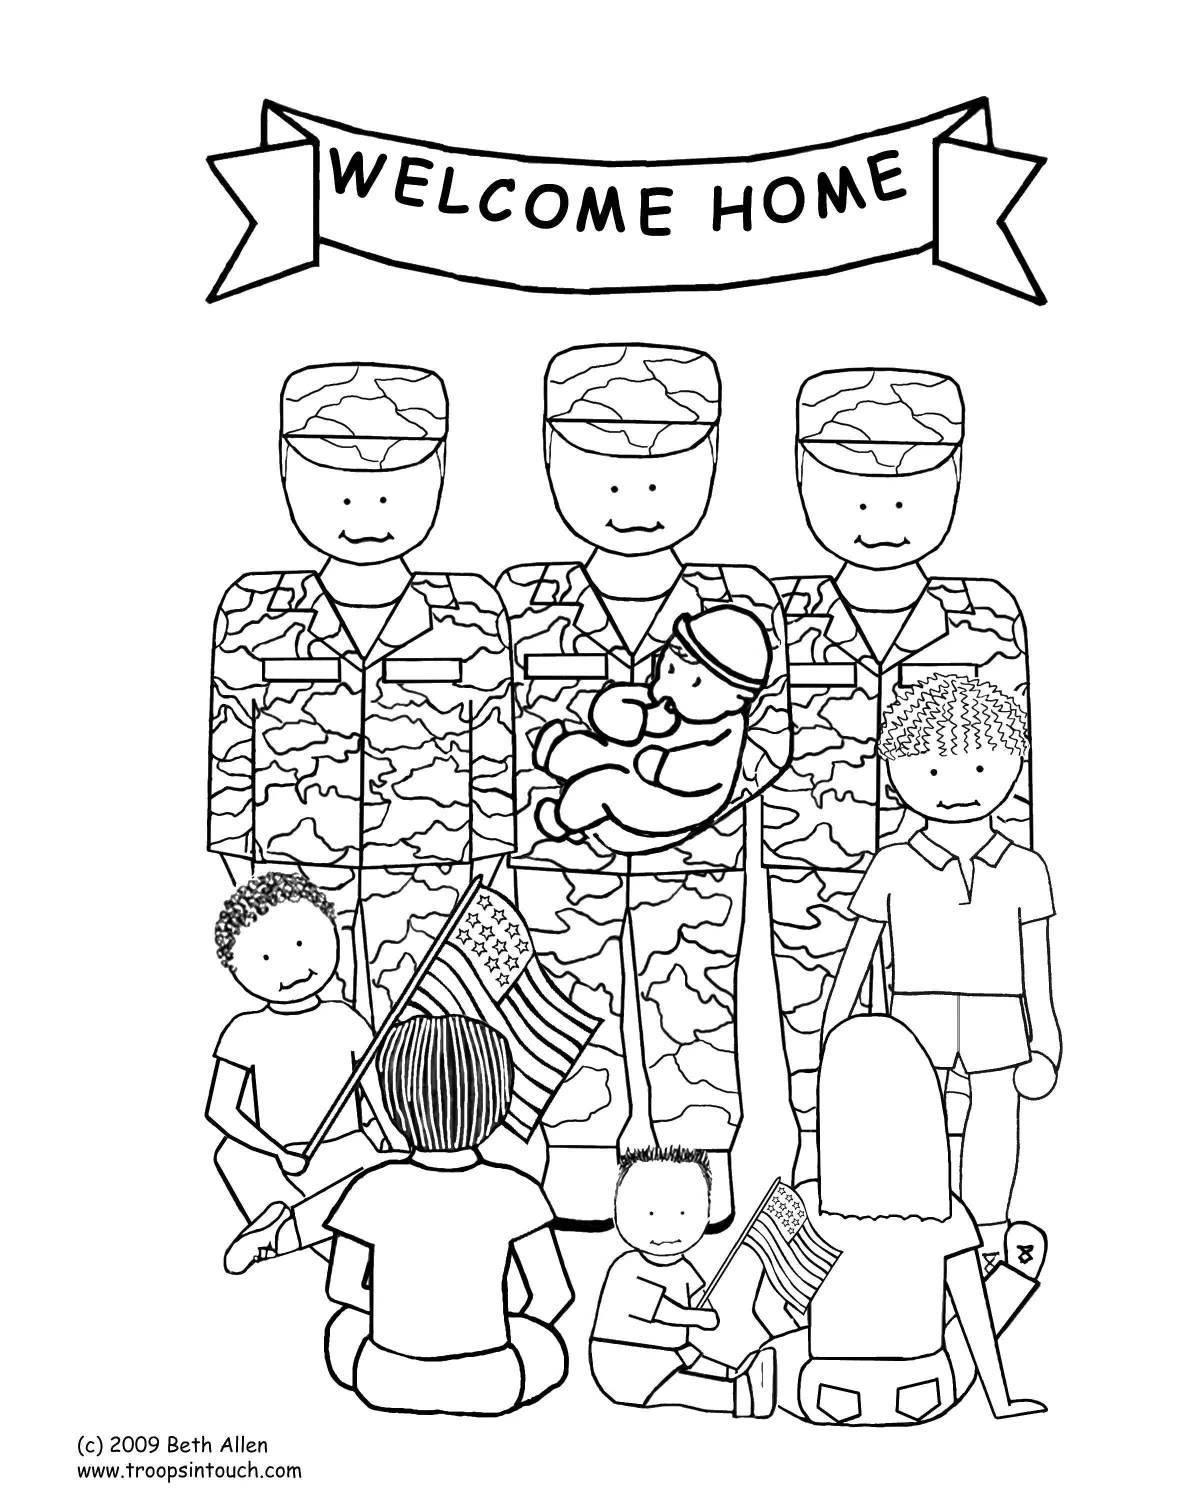 Colorful coloring for soldiers with words of support